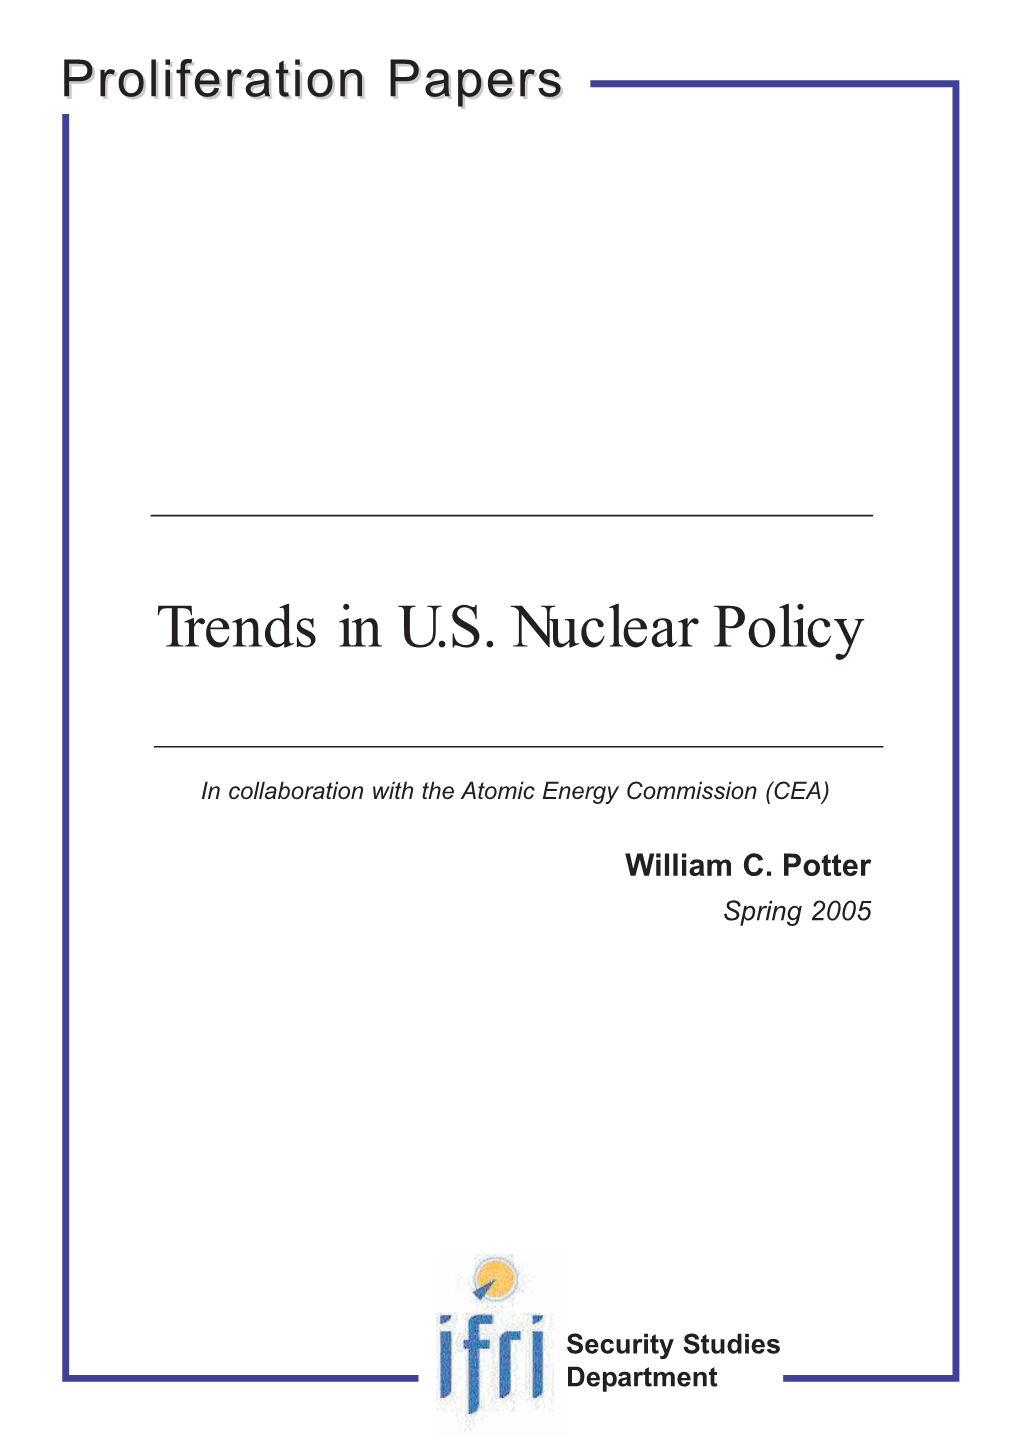 Trends in U.S. Nuclear Policy